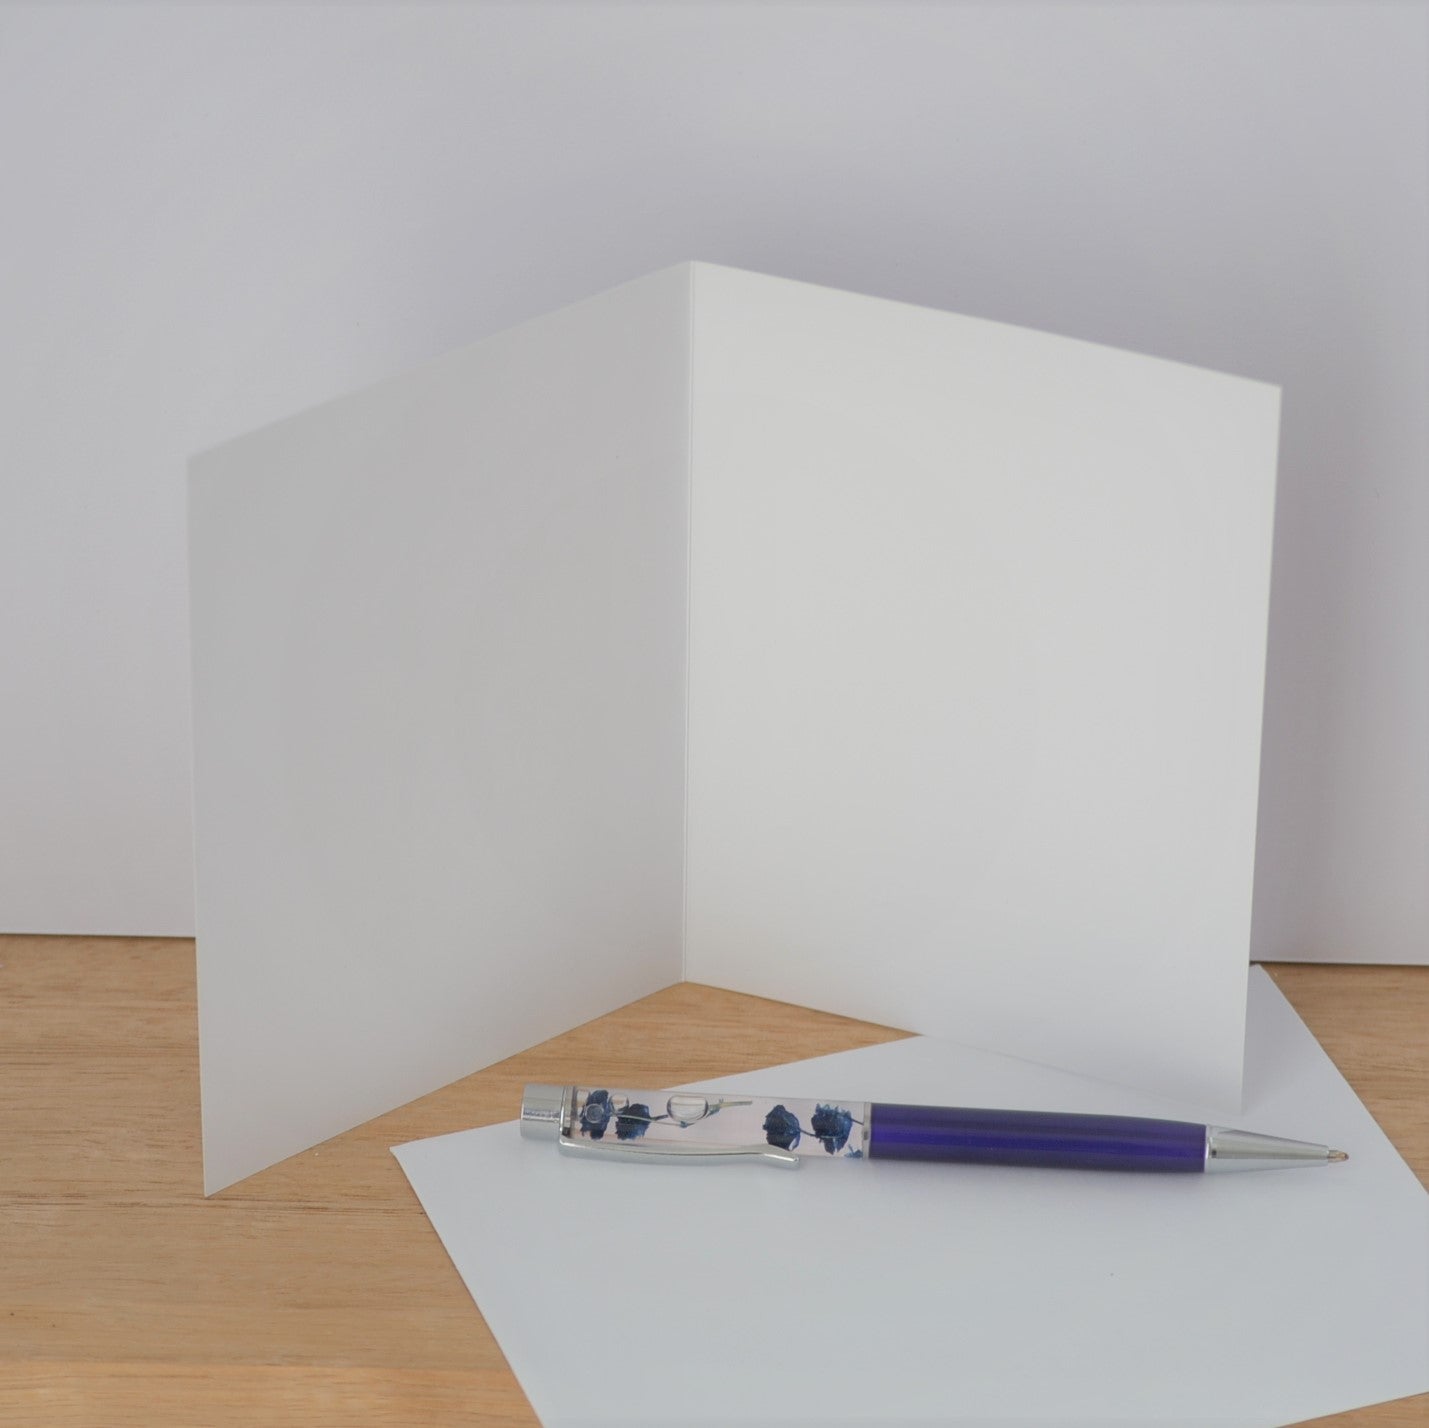 Open blank greeting card standing on timber, with blue pen at base